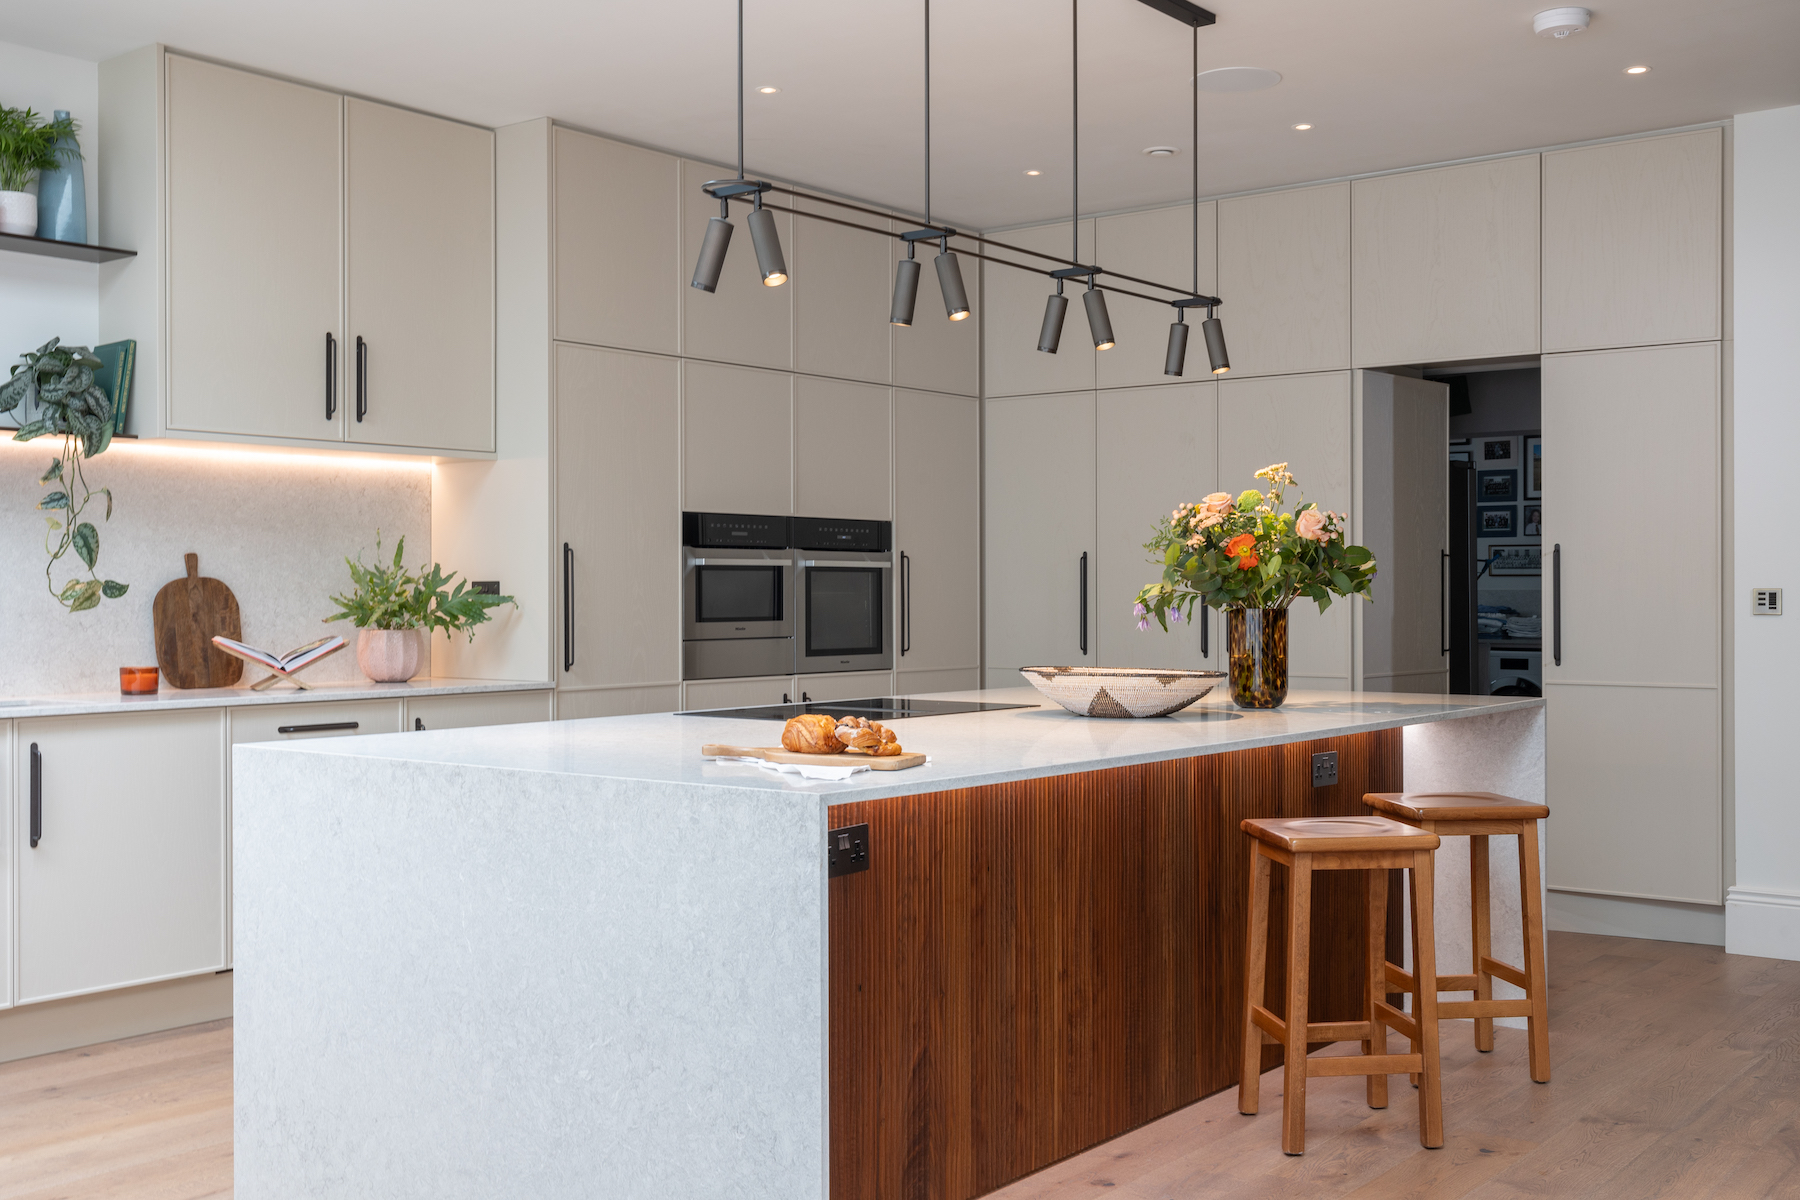 Contemporary Kitchen Designed Bespoke by Pfeiffer Design. Neutral colour palette with warm lighting design